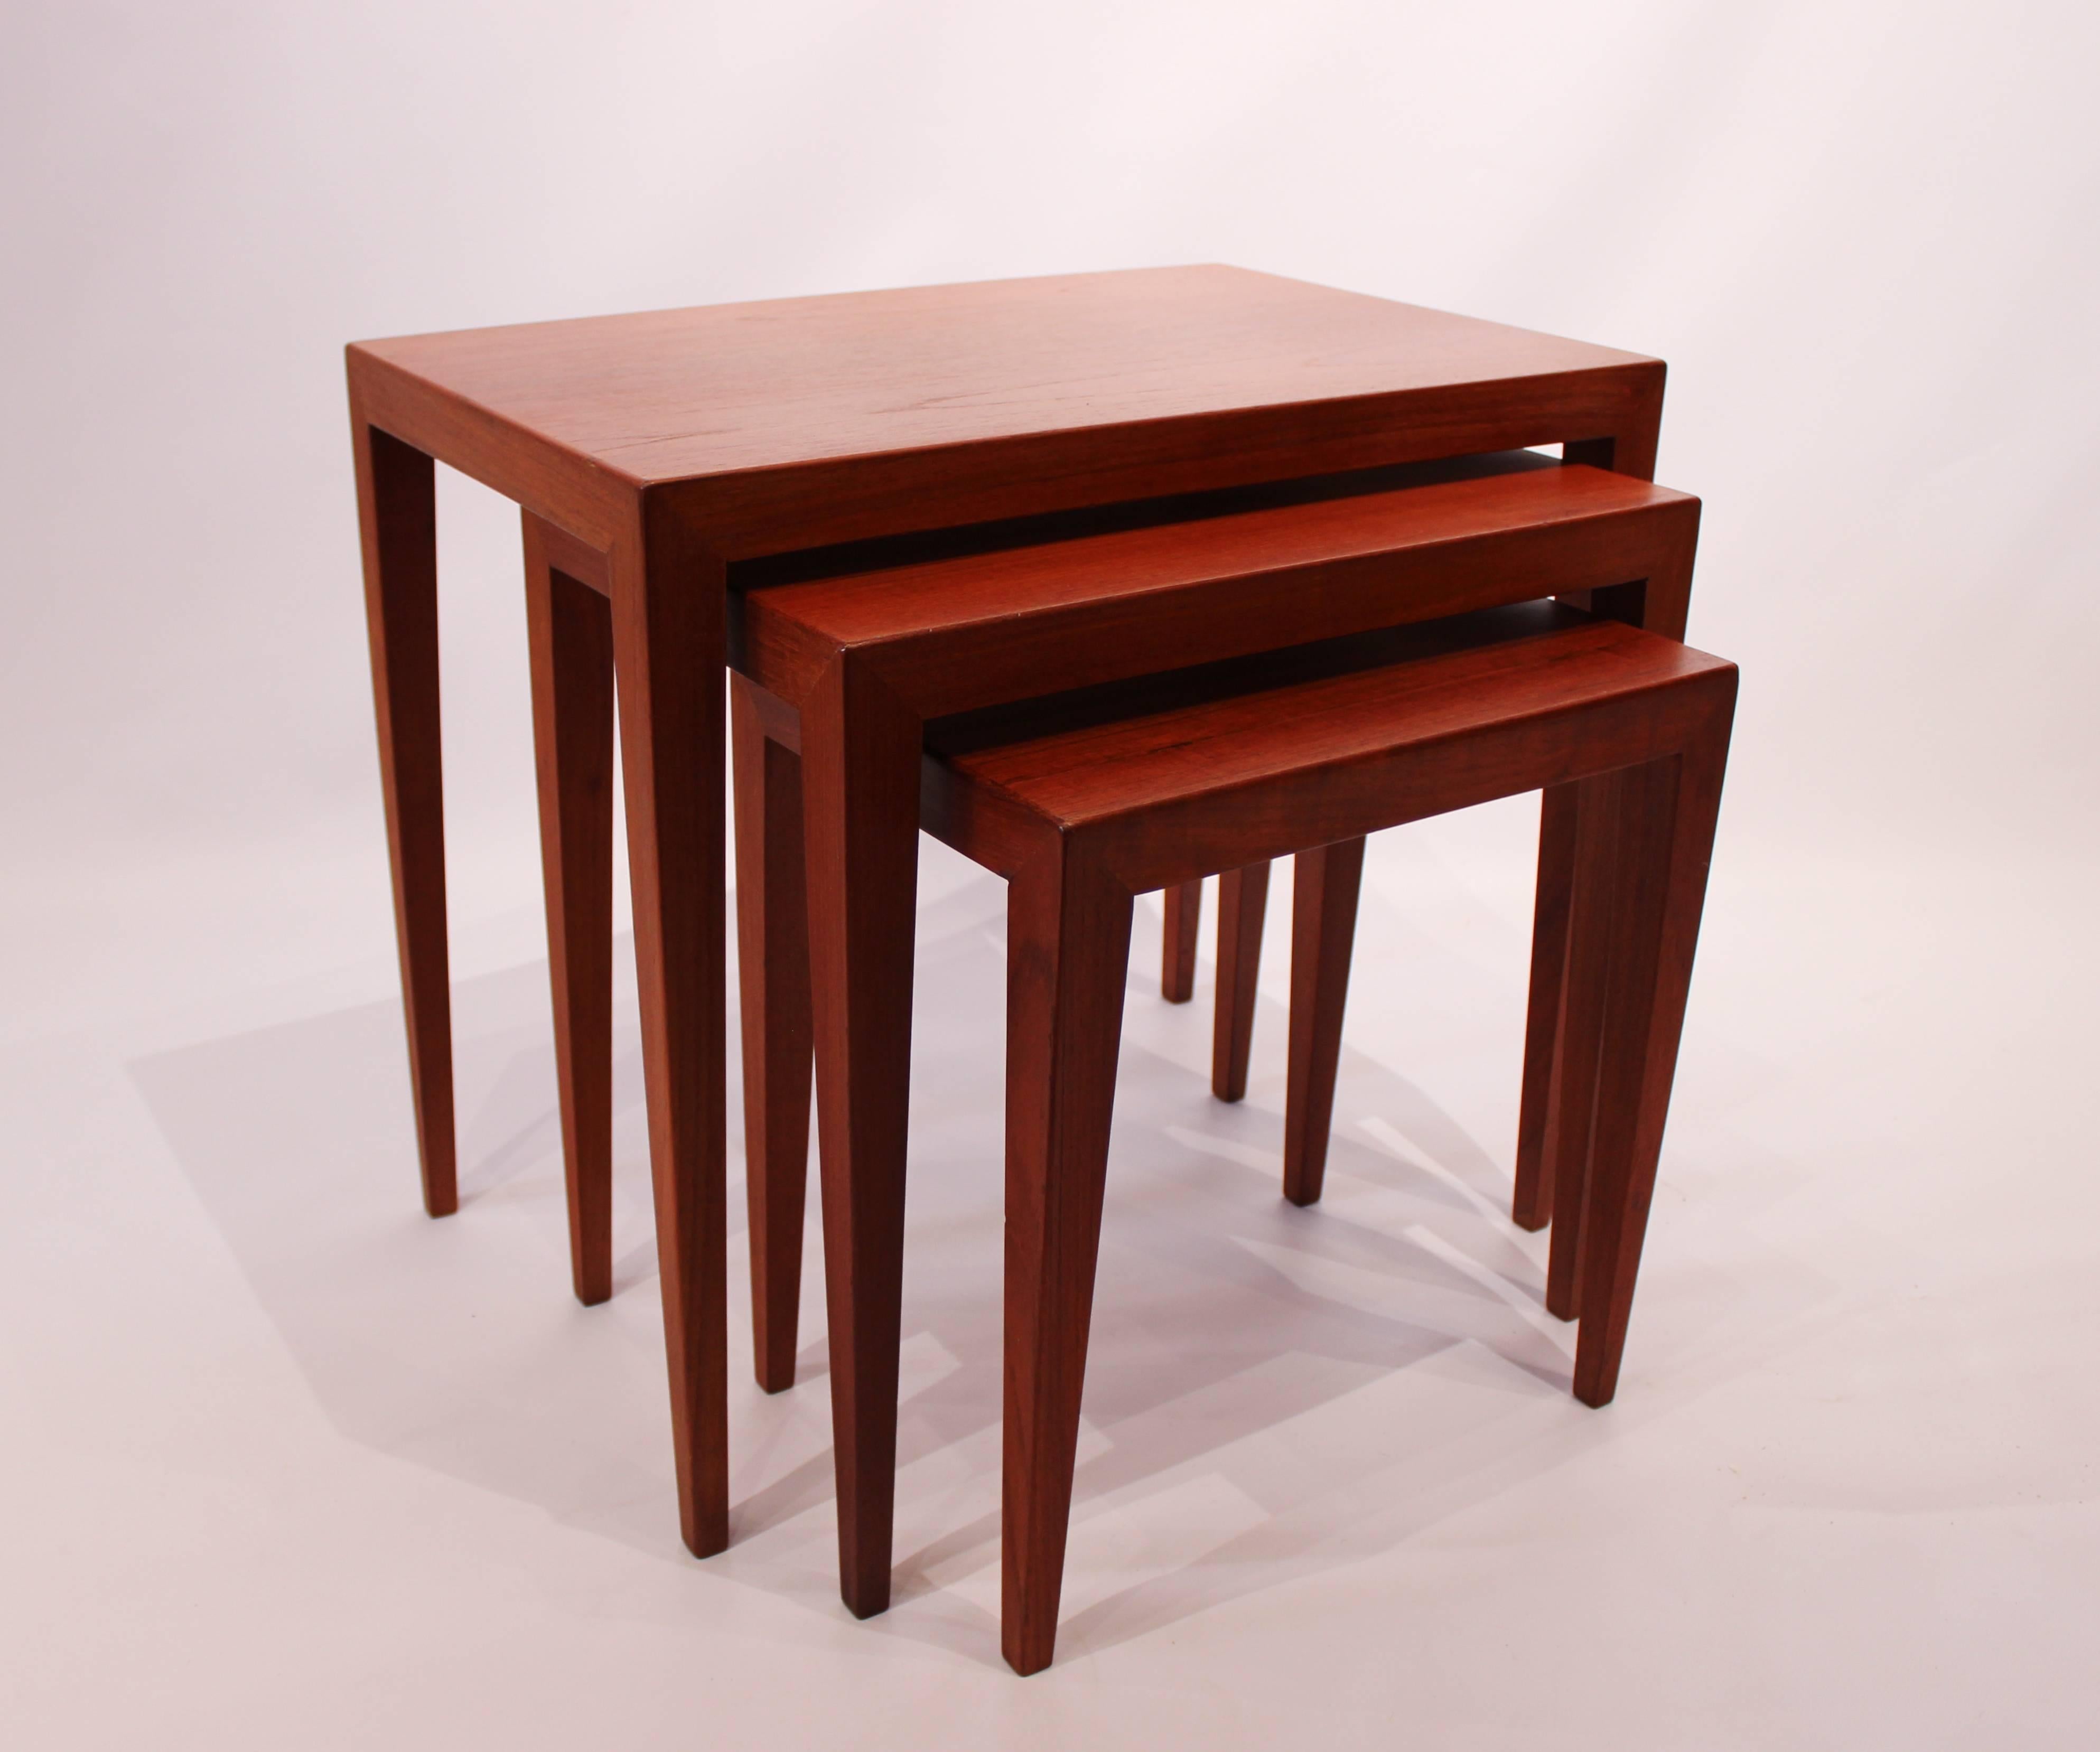 A set of nesting tables in teak from Haslev furniture factory of Danish design from the 1960s. The tables are in great vintage condition. 
Measures: H - 51.5/46.5/41 cm, W - 57/47/37 cm and D - 37/32.5/26 cm.